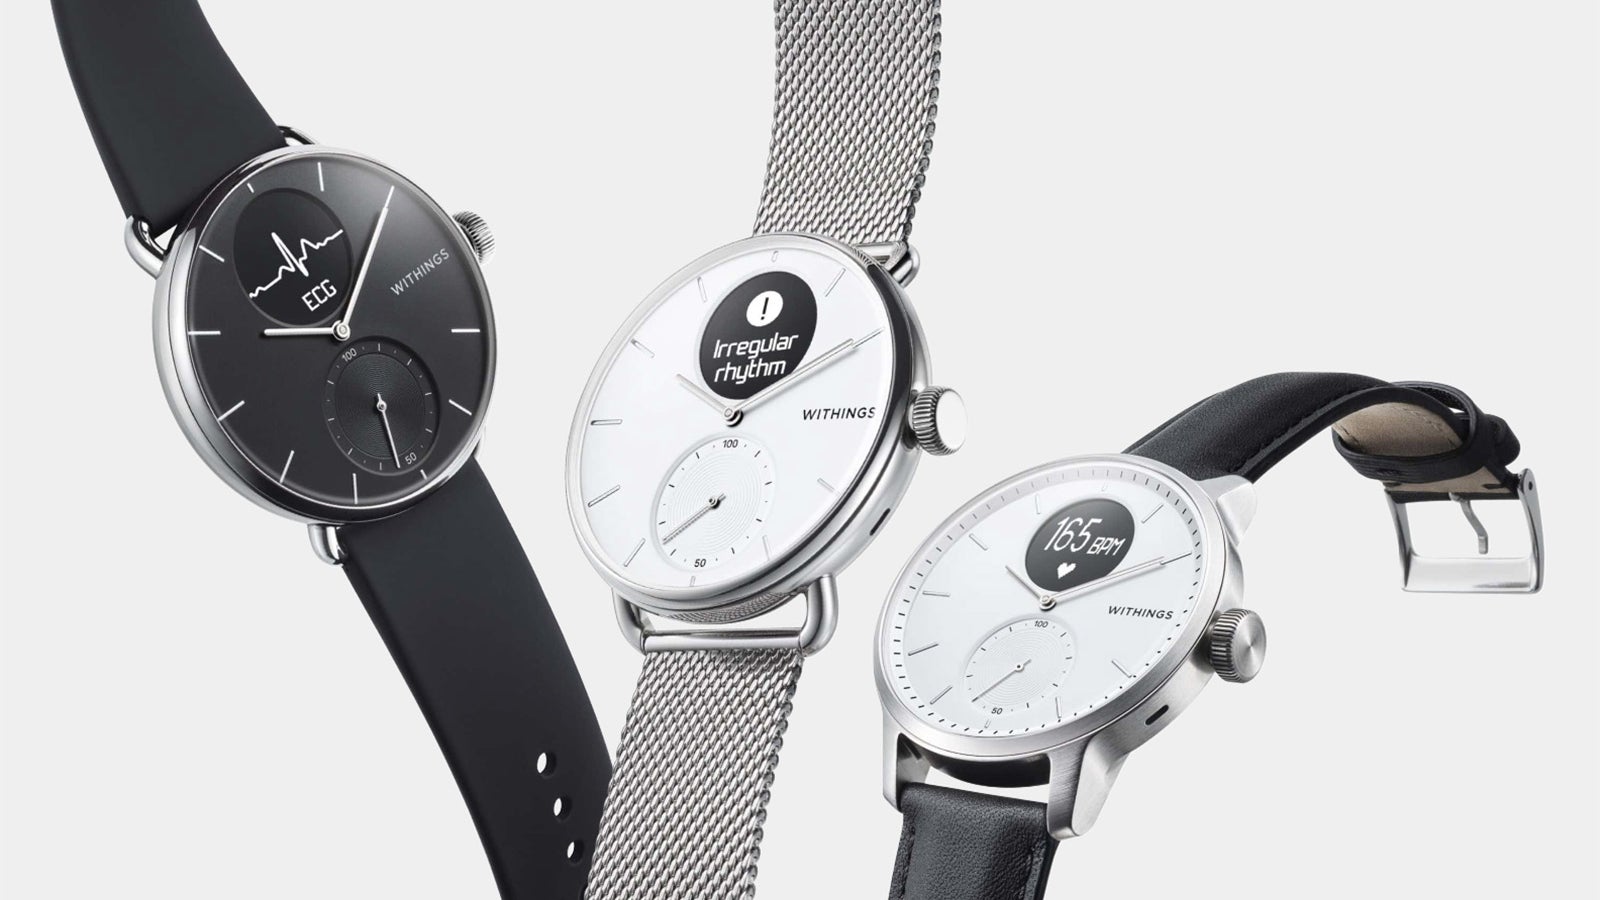 Withings' new Scanwatch brings a feature never before seen in a